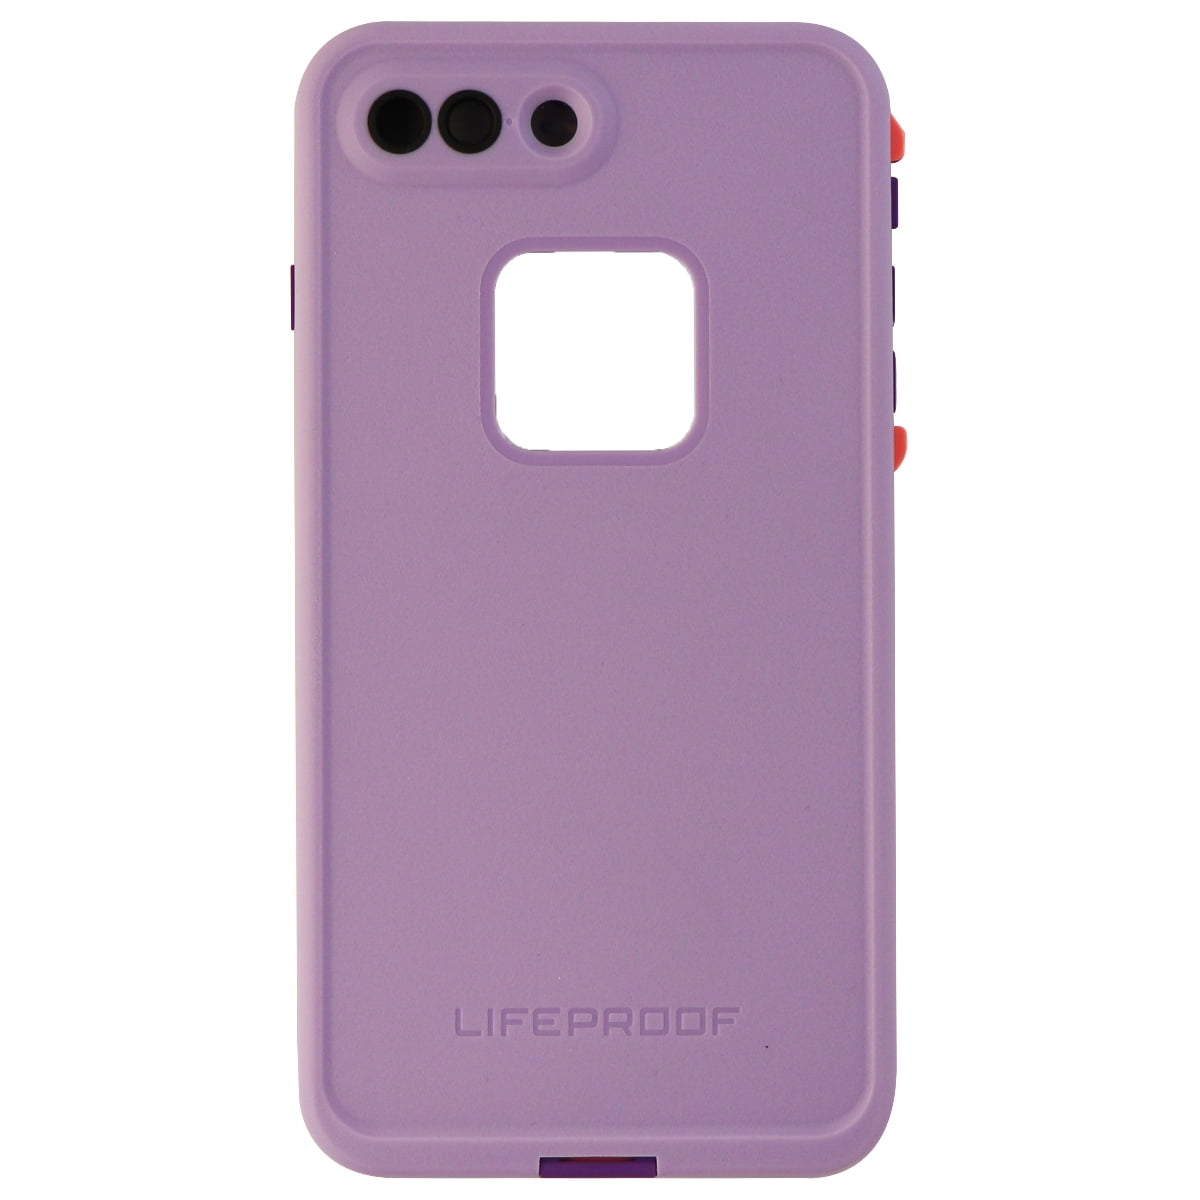 LifeProof FRE Series Protective Case for Apple iPhone 8 Plus 7 Plus